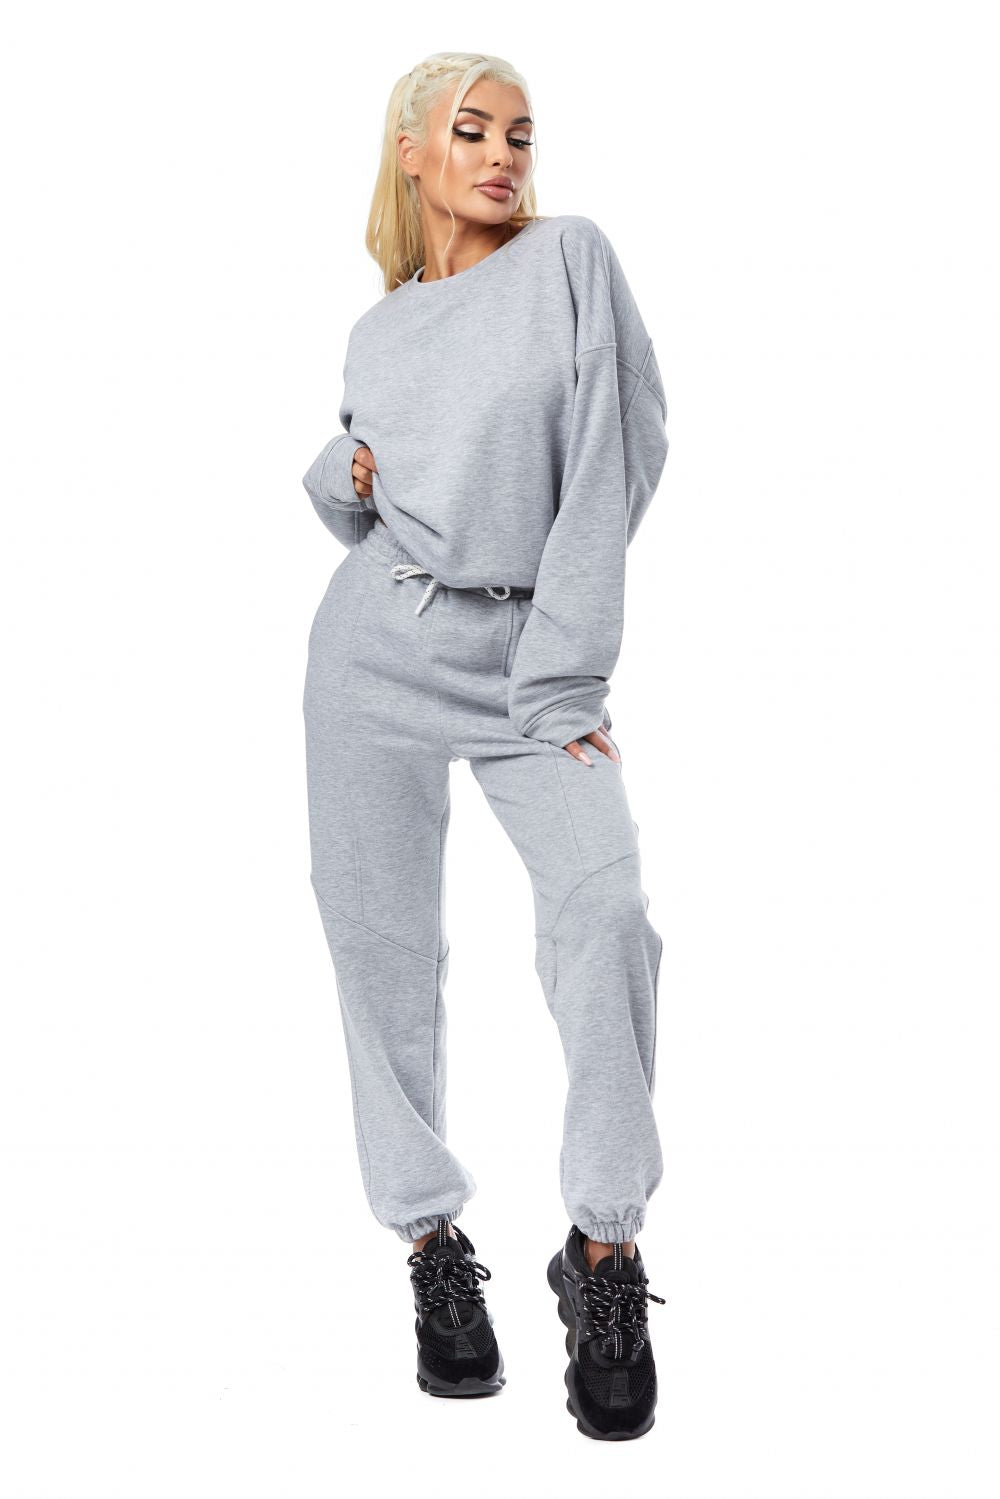 Casual cotton set in gray by Onesimus Bogas